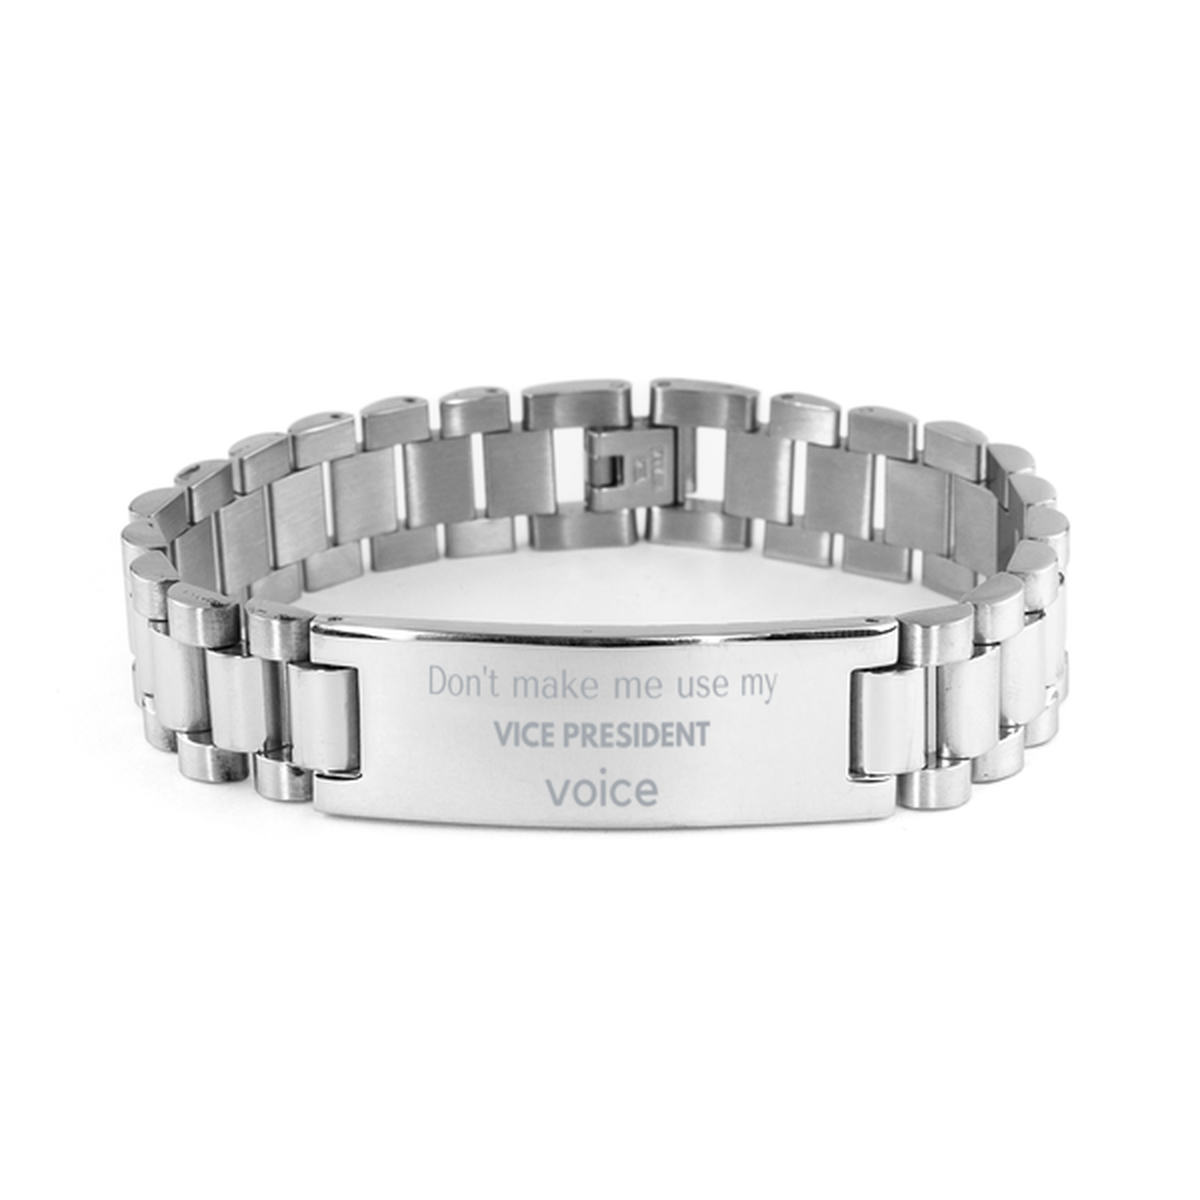 Don't make me use my Vice President voice, Sarcasm Vice President Gifts, Christmas Vice President Ladder Stainless Steel Bracelet Birthday Unique Gifts For Vice President Coworkers, Men, Women, Colleague, Friends